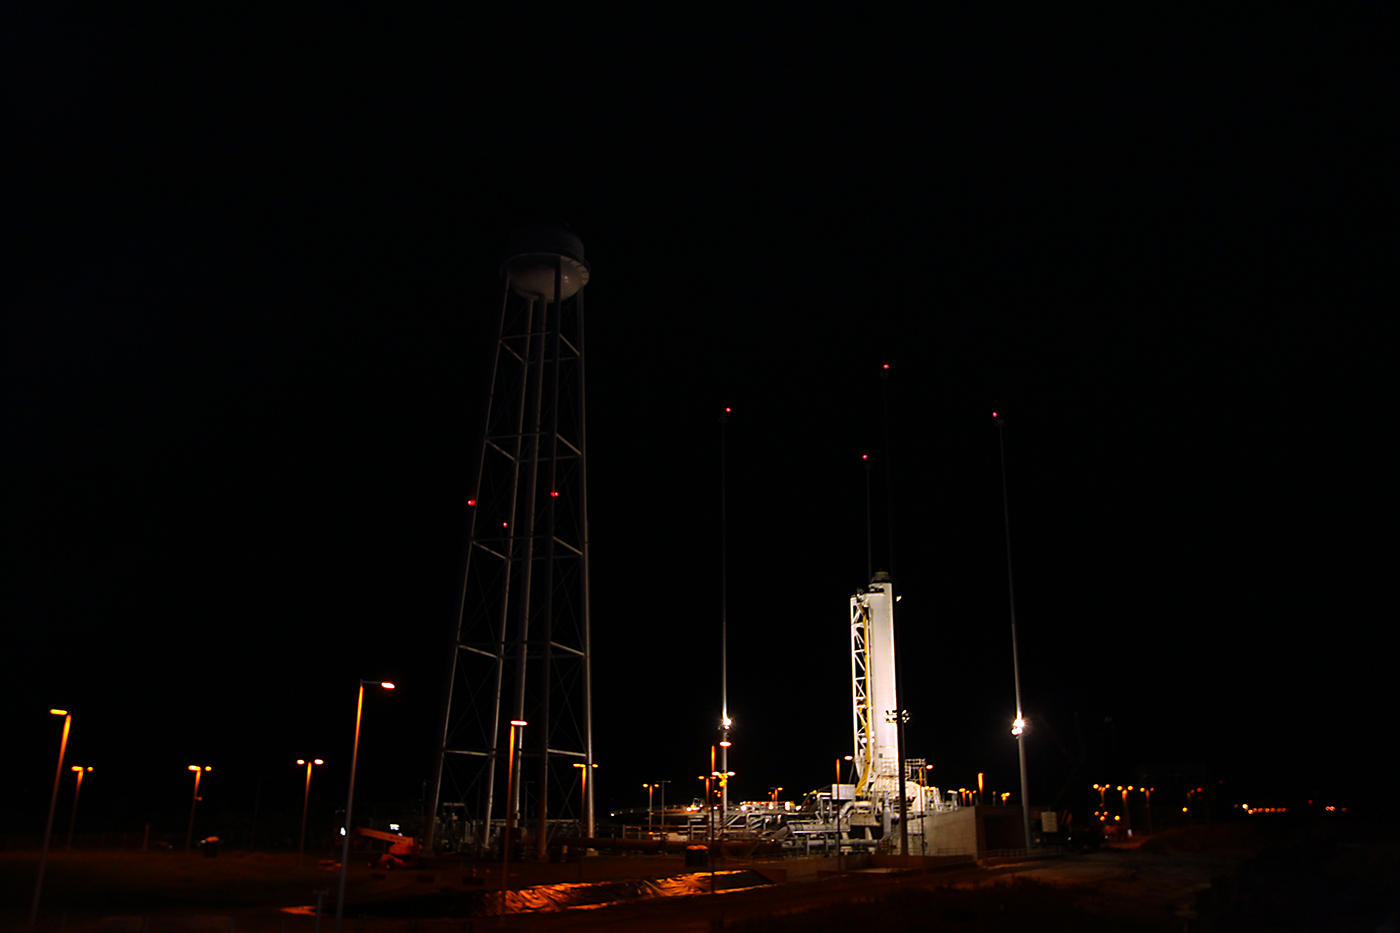 Antares vertical on launch pad 0A.